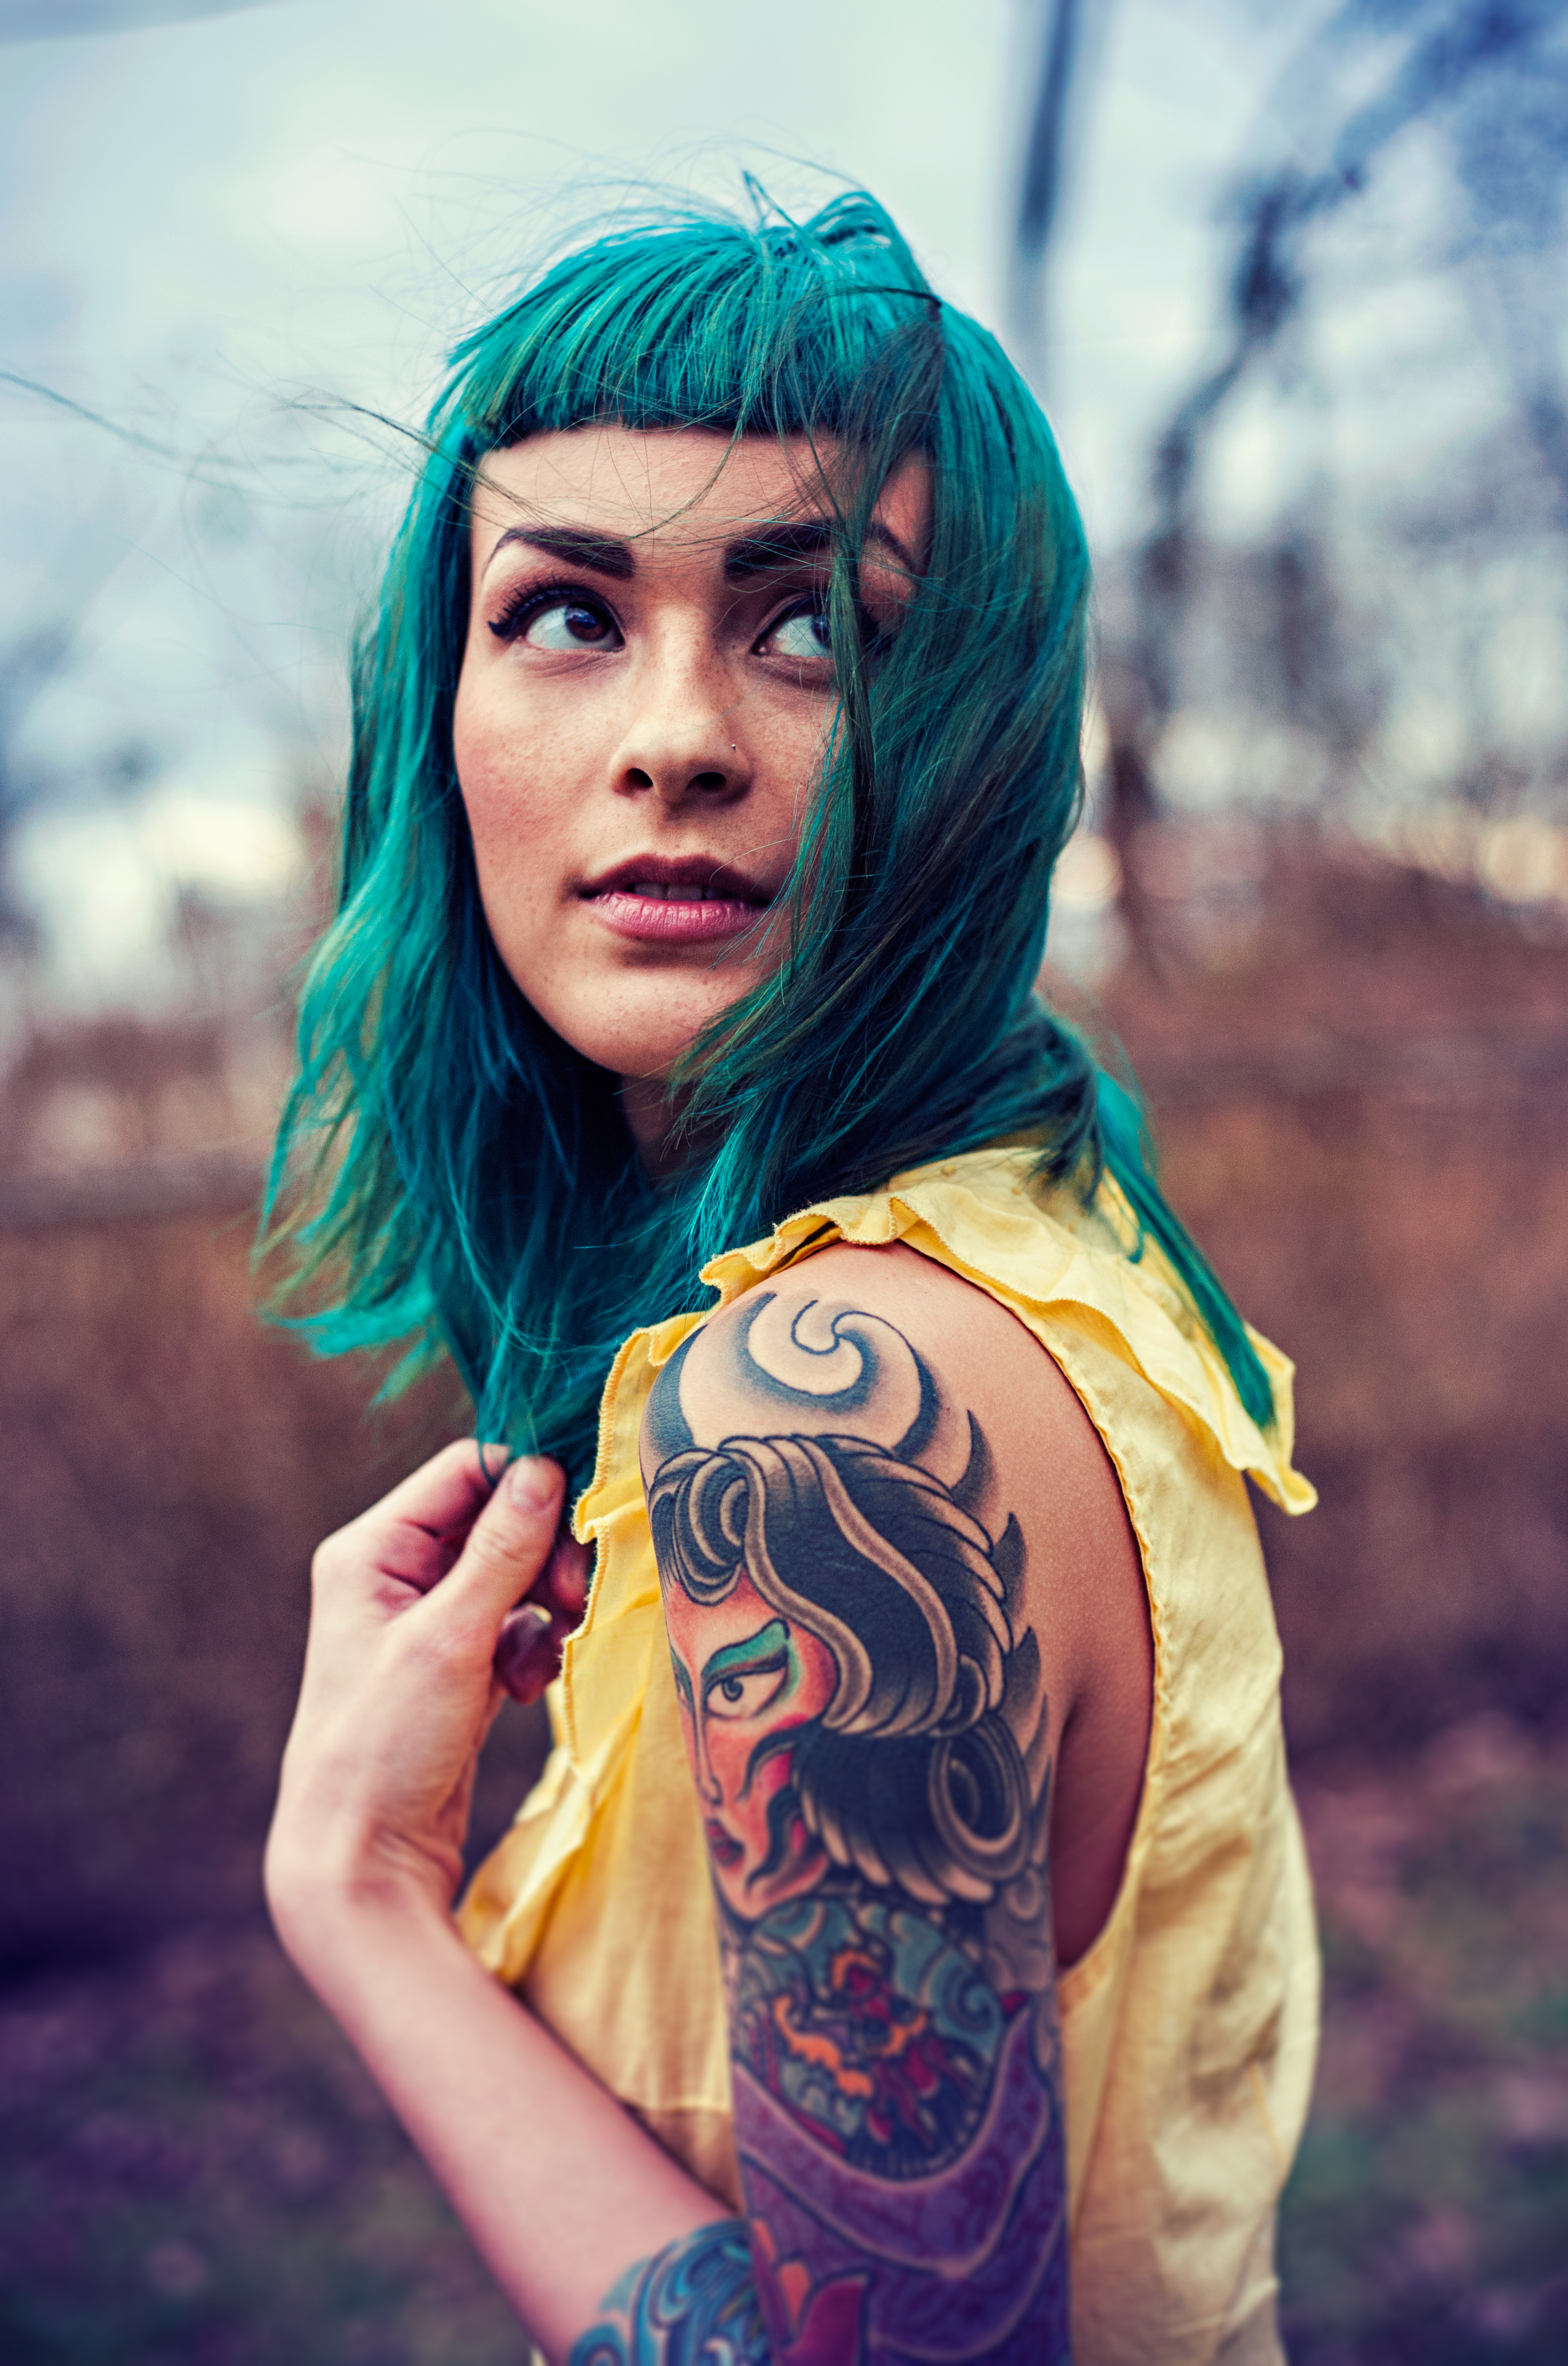 Ink Stigma: Attitudes and Regrets Over Tattoos Today